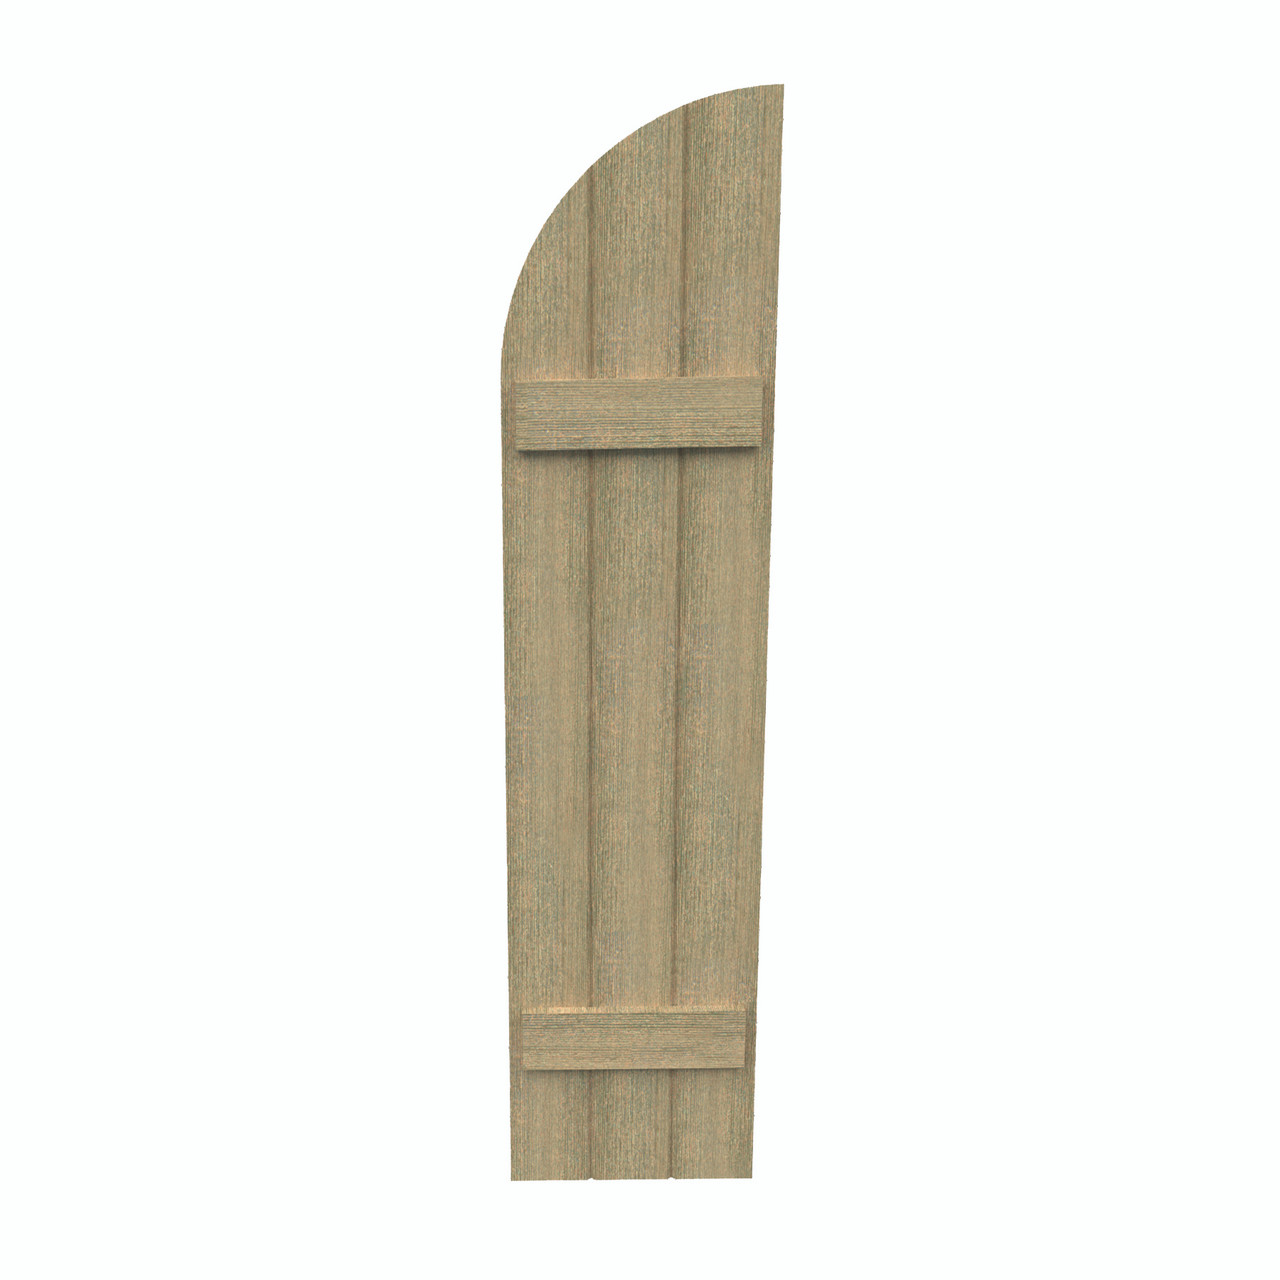 14 inch by 52 inch Quarter Round Shutter with 3-Boards